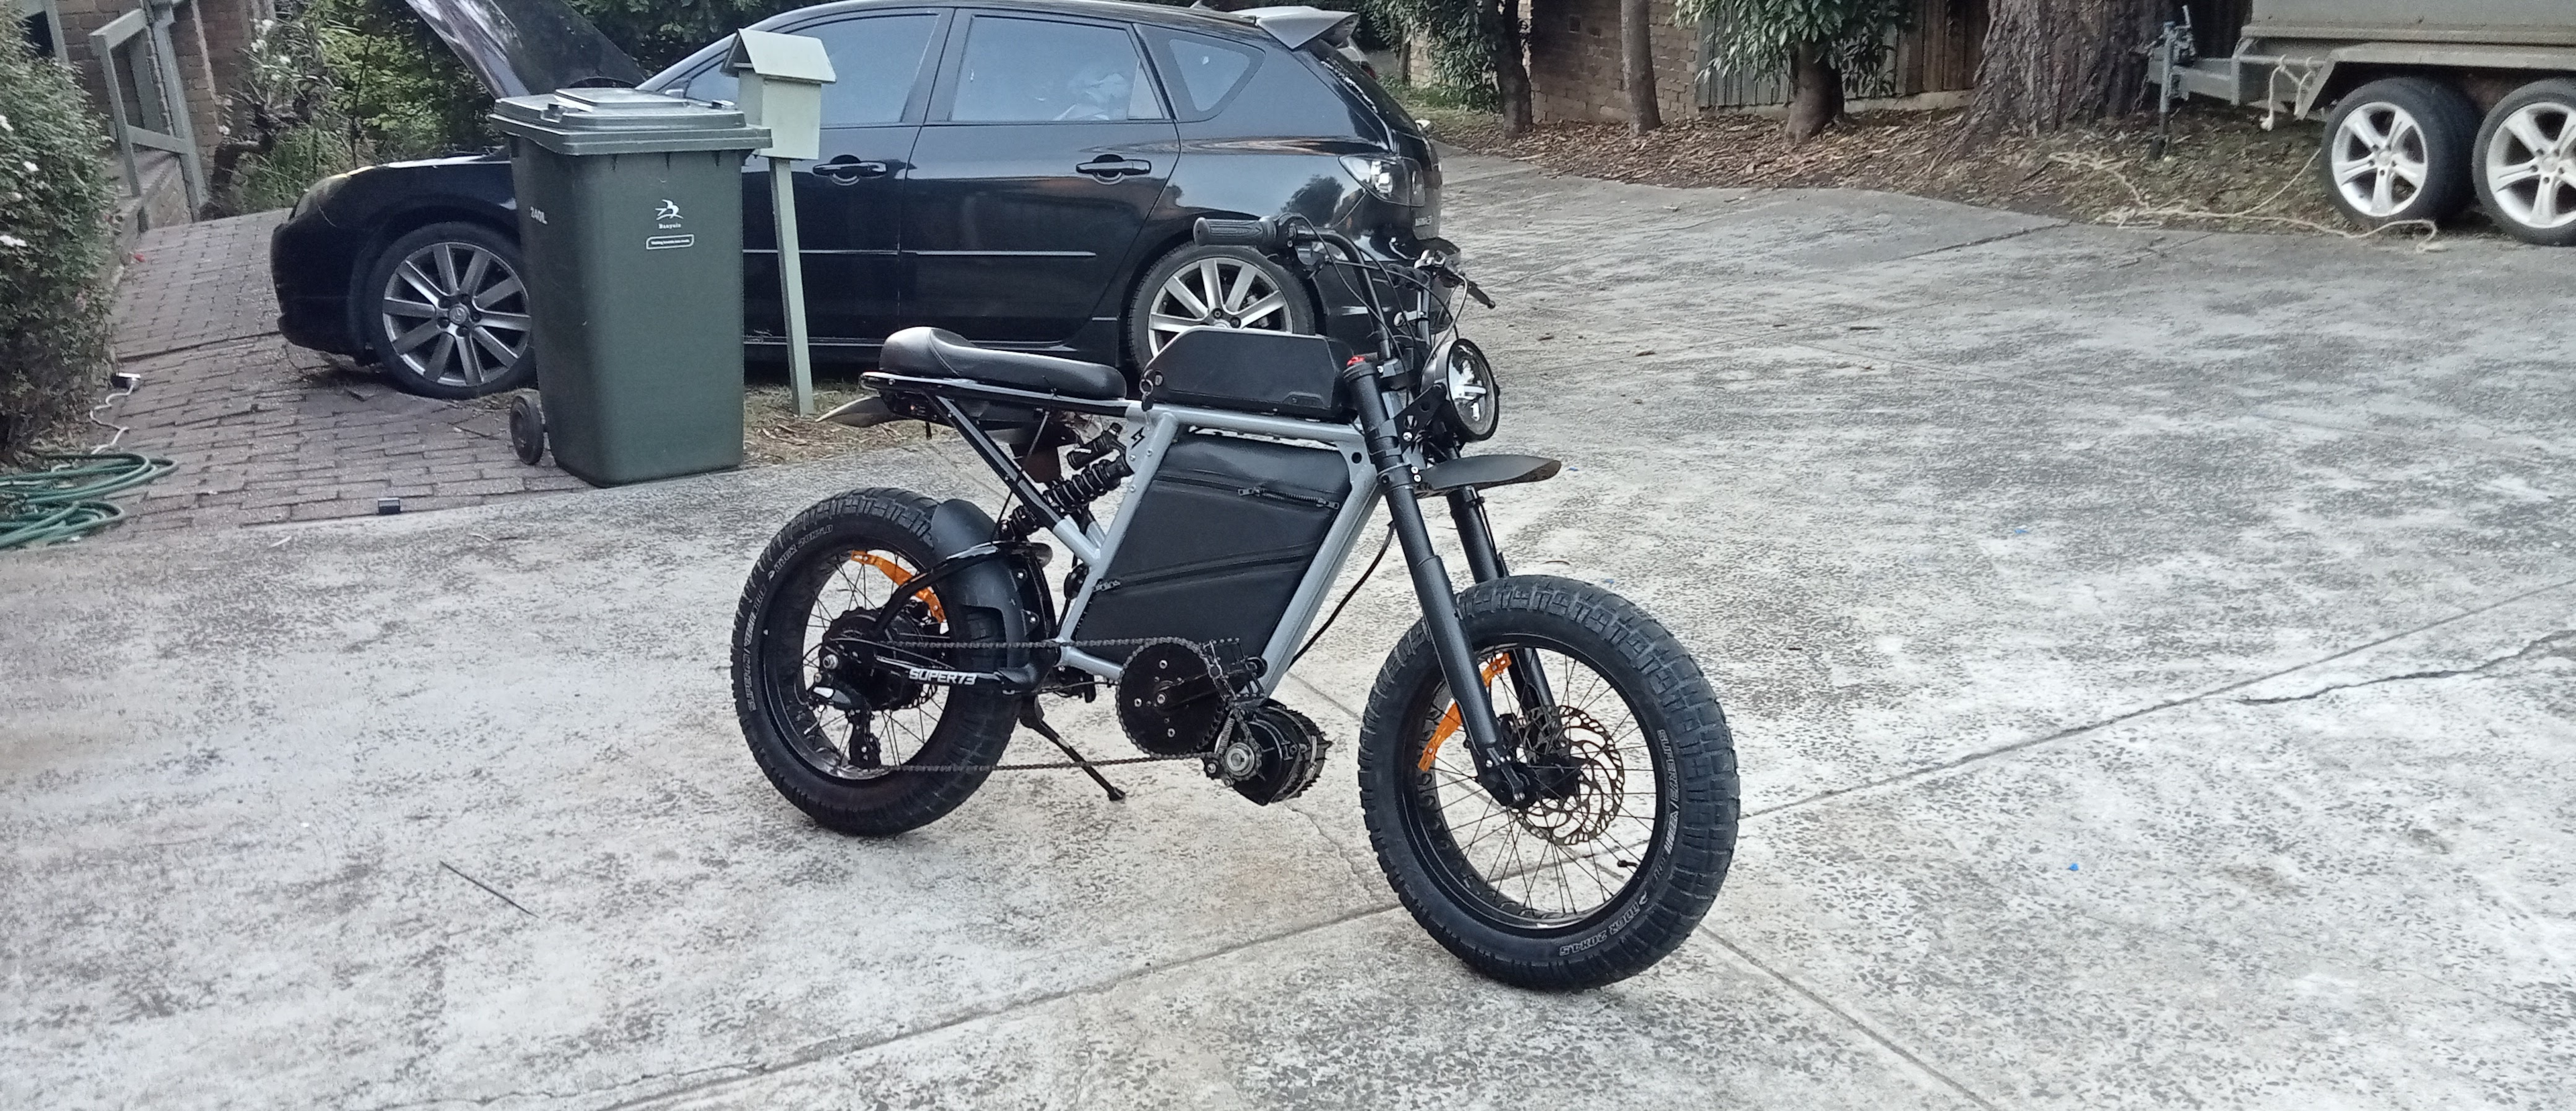 A 3000W electric bike with a powerful motor and battery